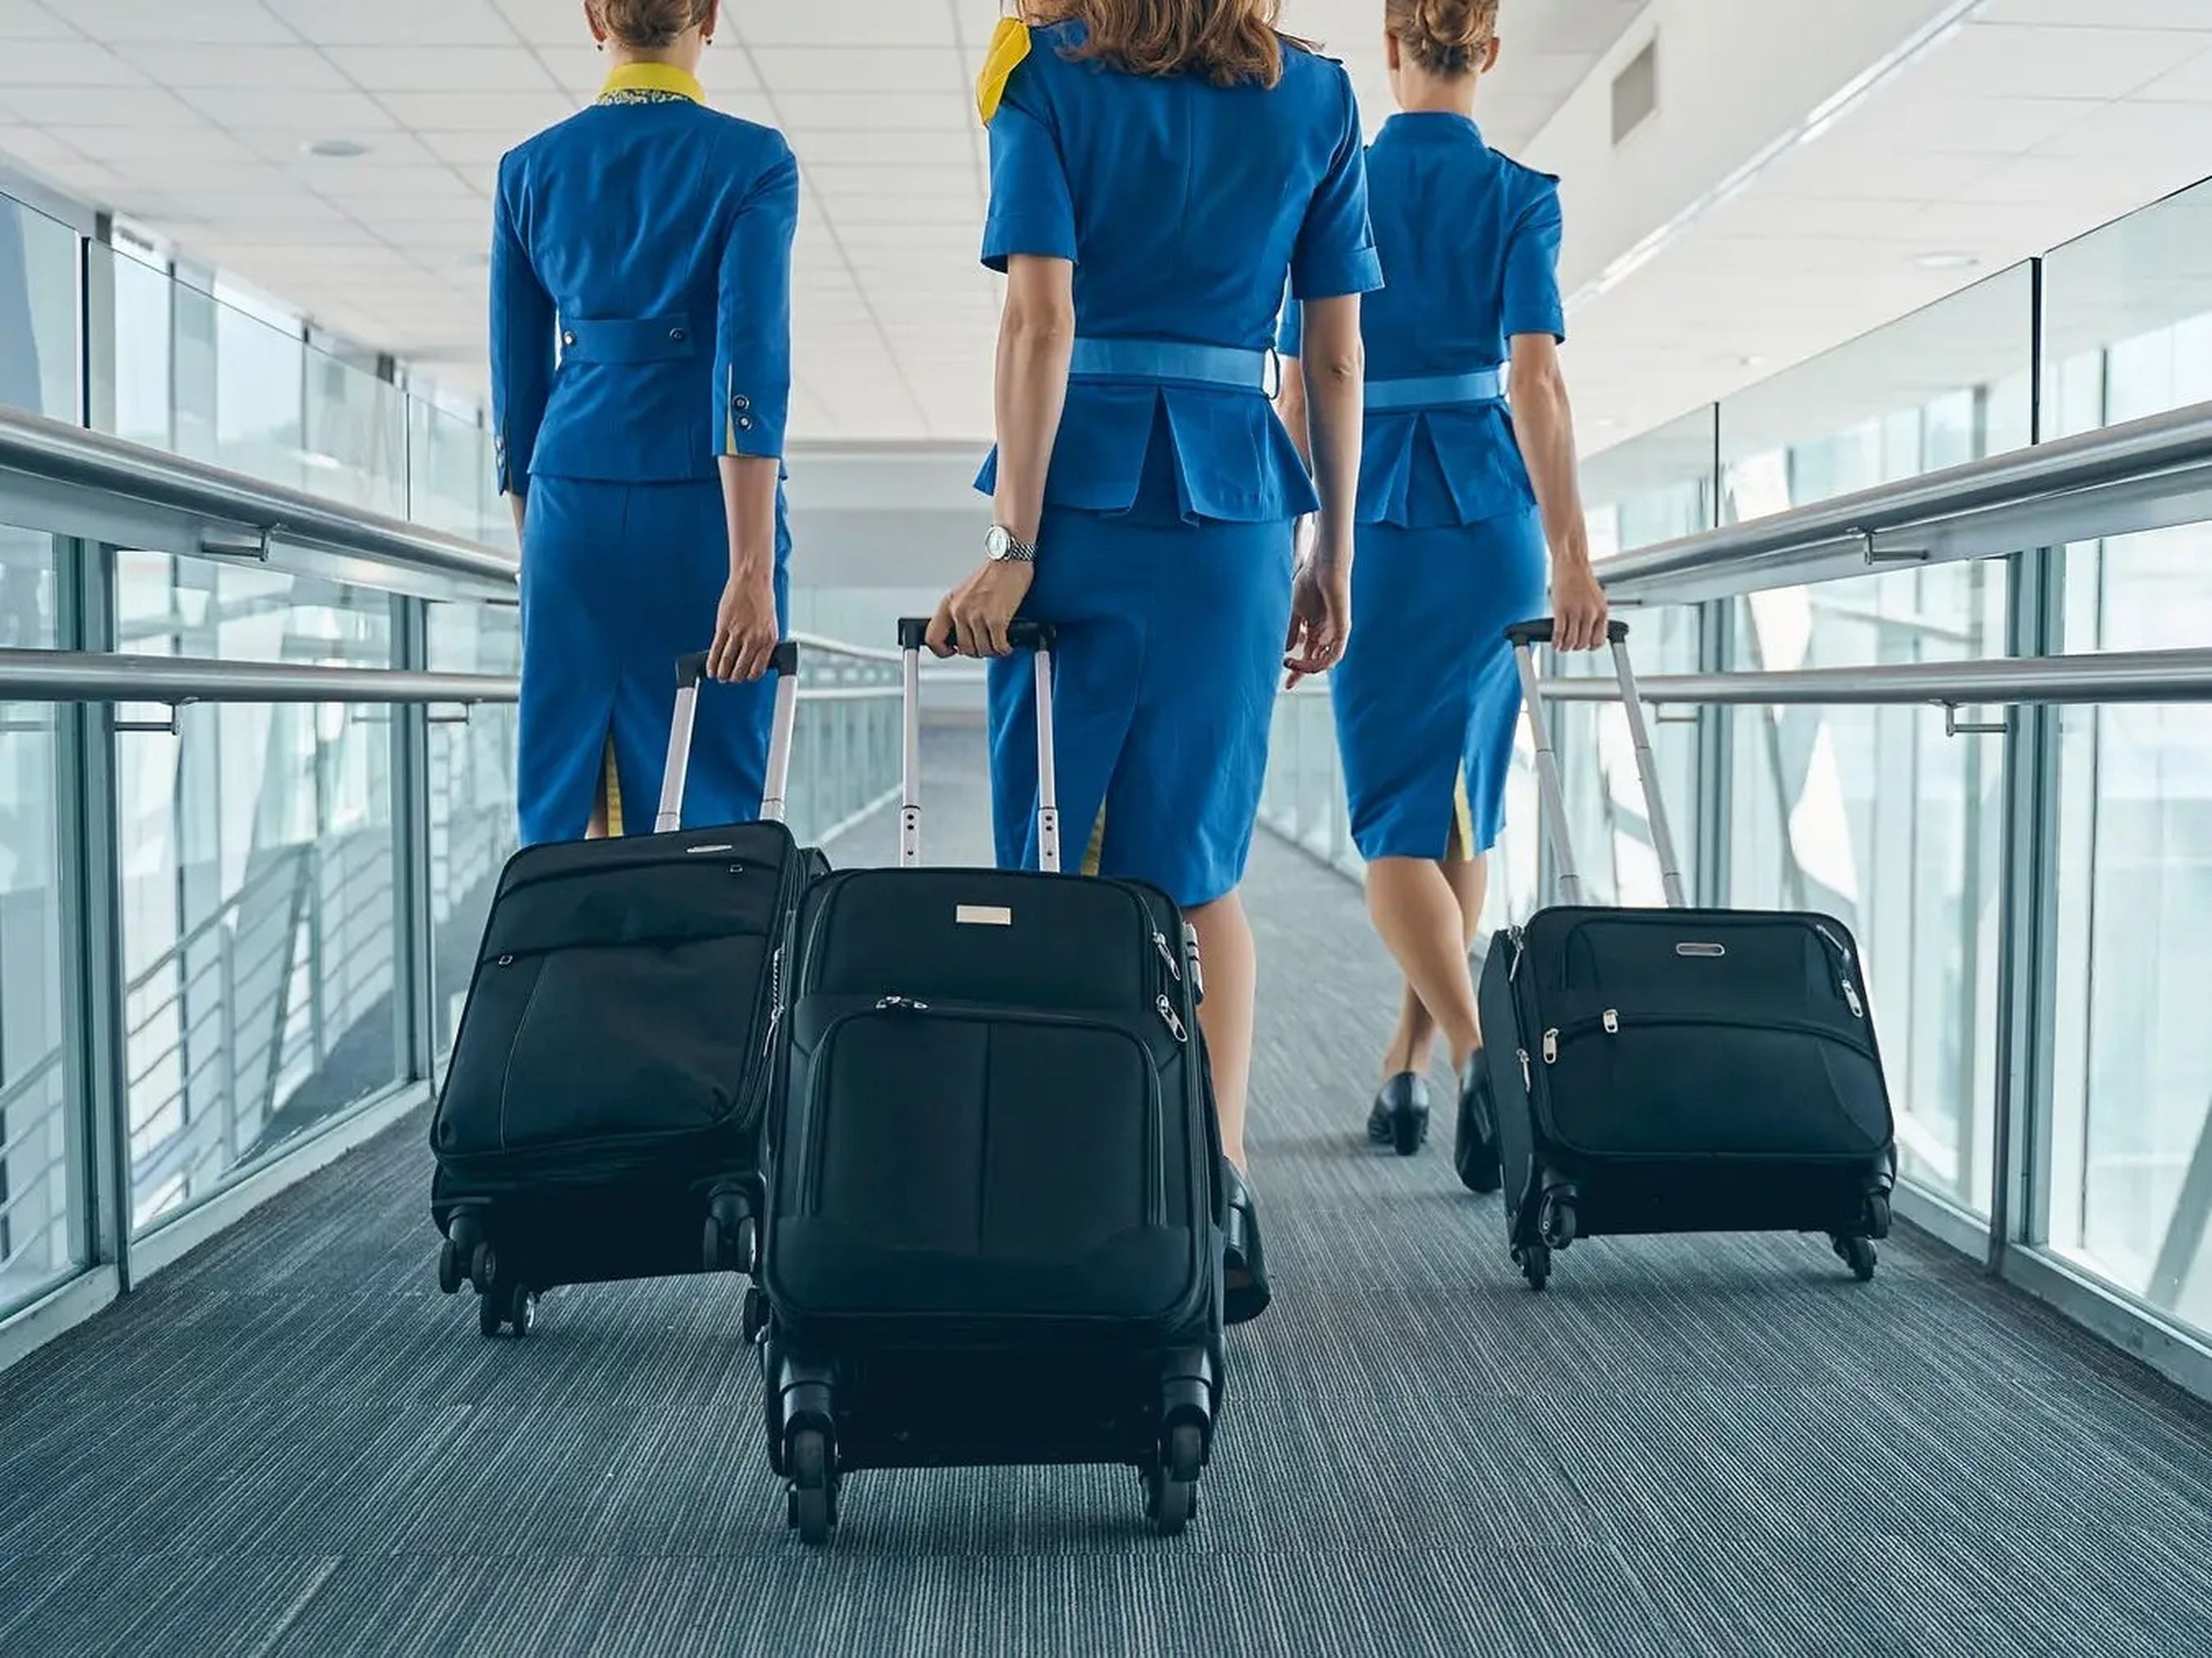 Three stewardesses in blue skirts and shirts with rolling suitcases behind them at an airport